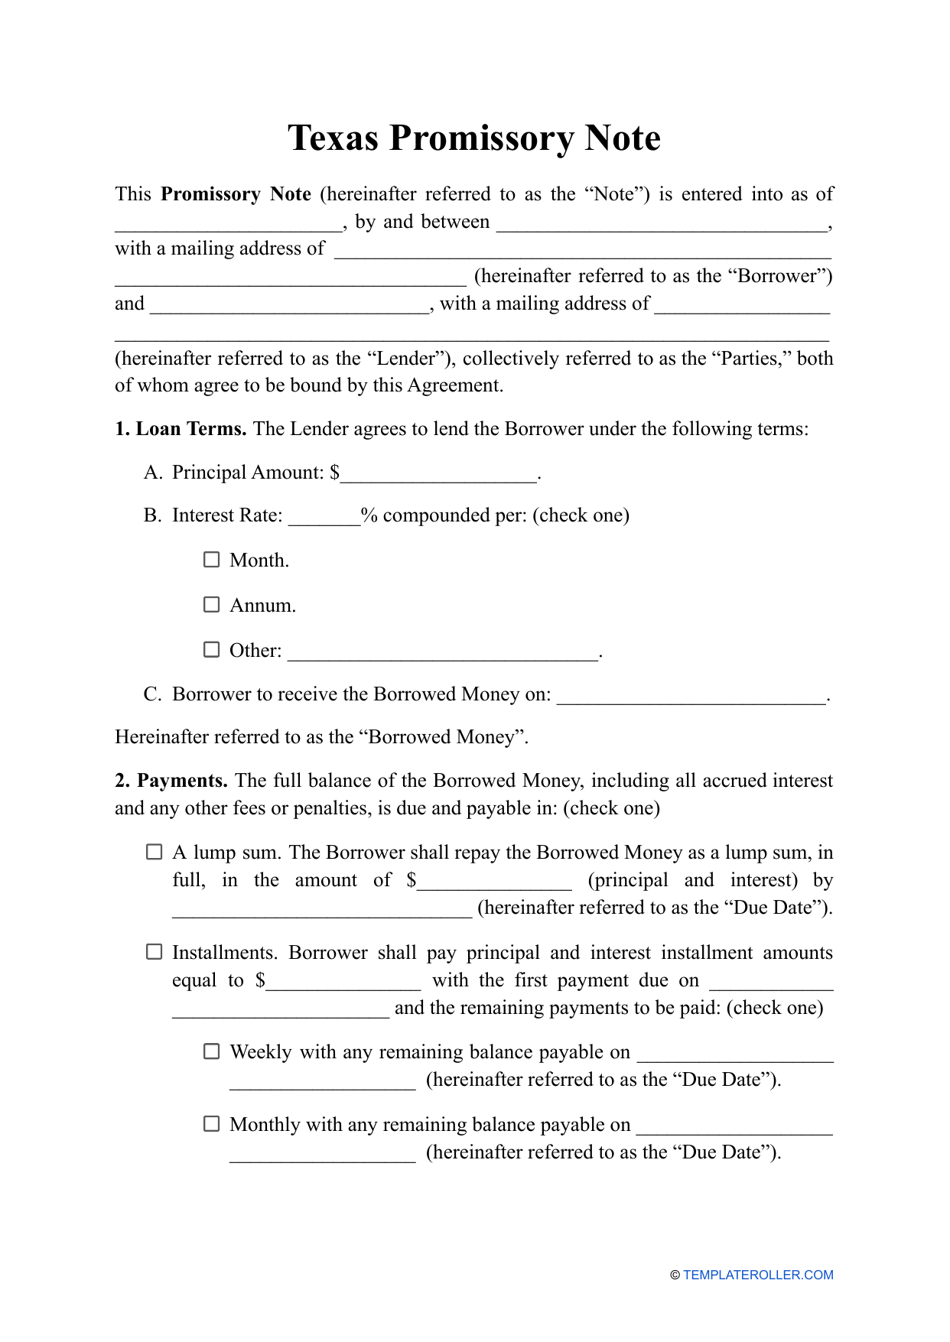 Texas Promissory Note Template Fill Out Sign Online And Download Pdf Templateroller 4623